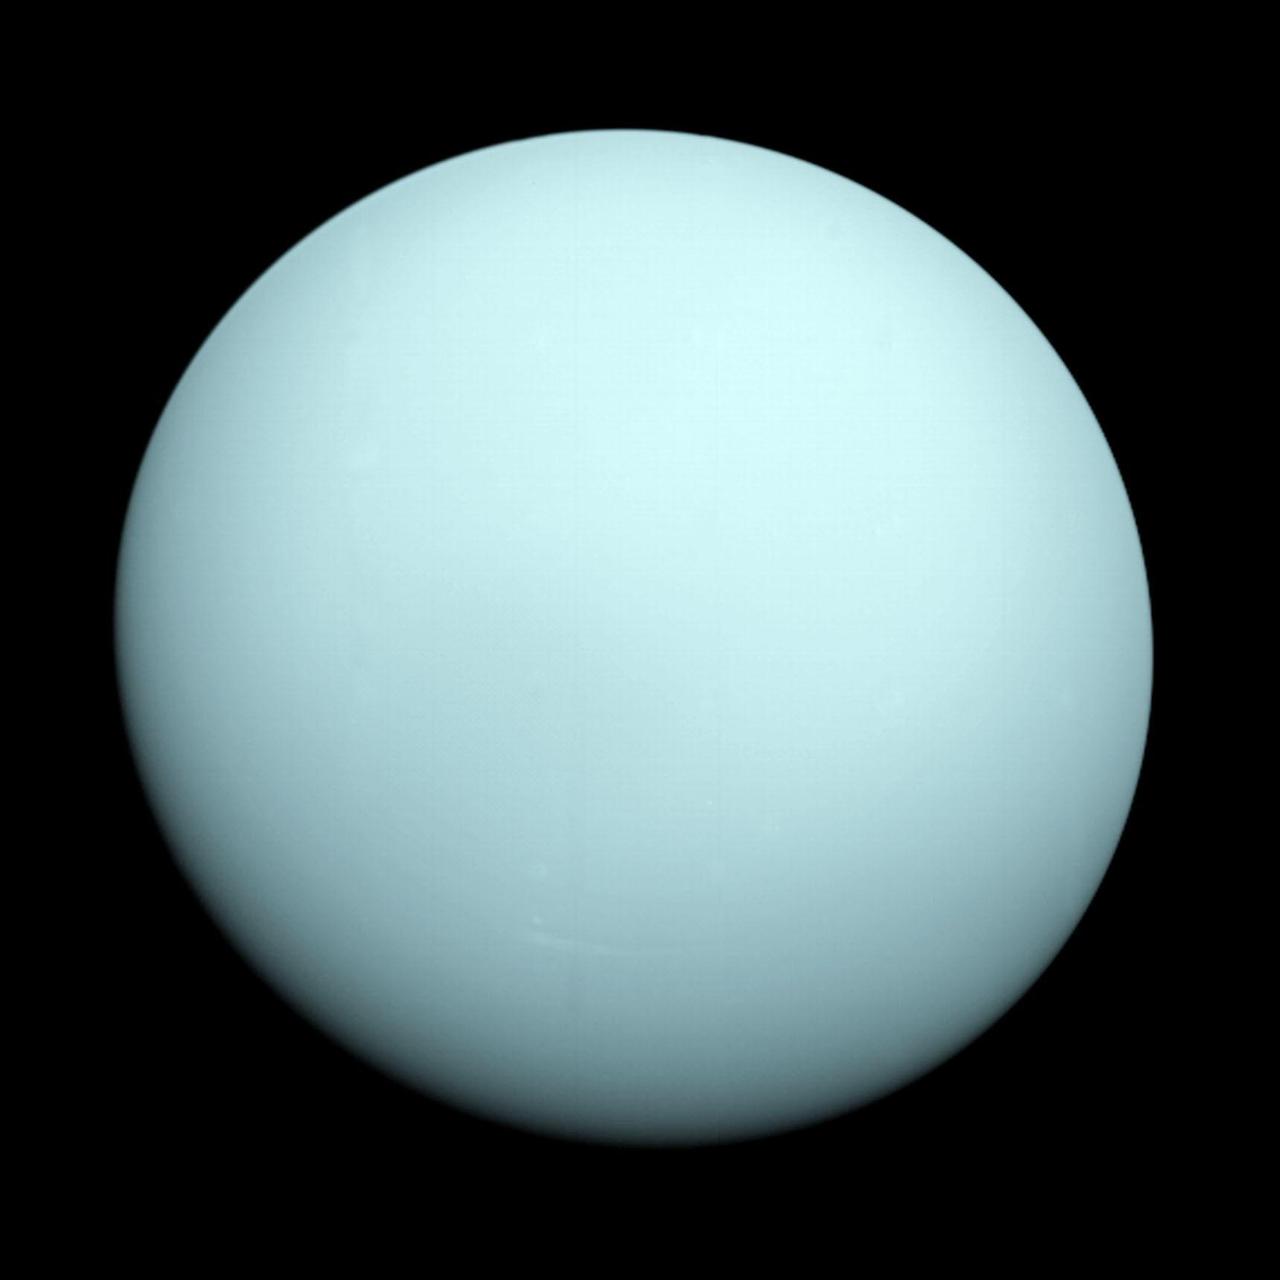 PLANET URANUS WITH ITS GREEN SMOOTH ATMOSPHERE FROM SPACE